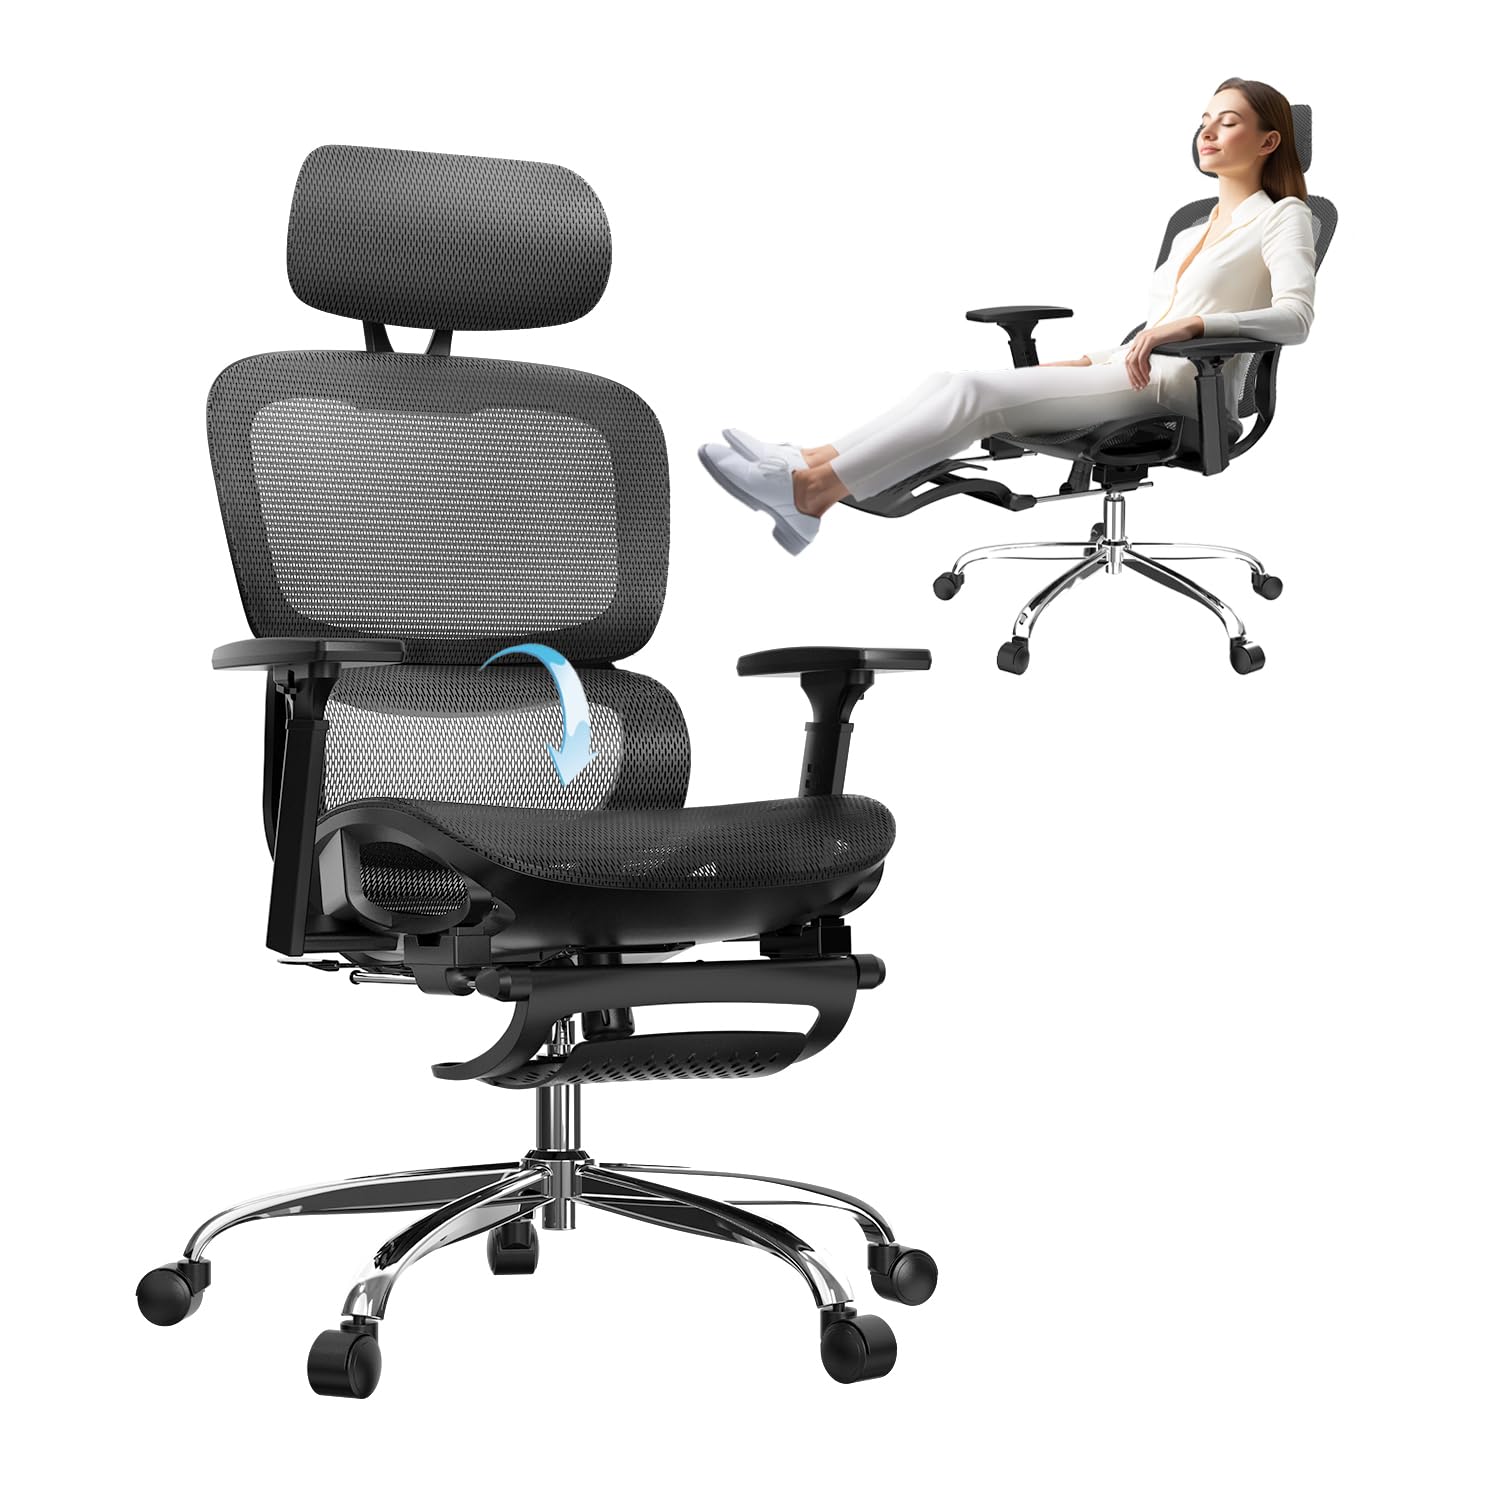 Chairs That Have Your Back: Lumbar Support Office Chairs Reviewed